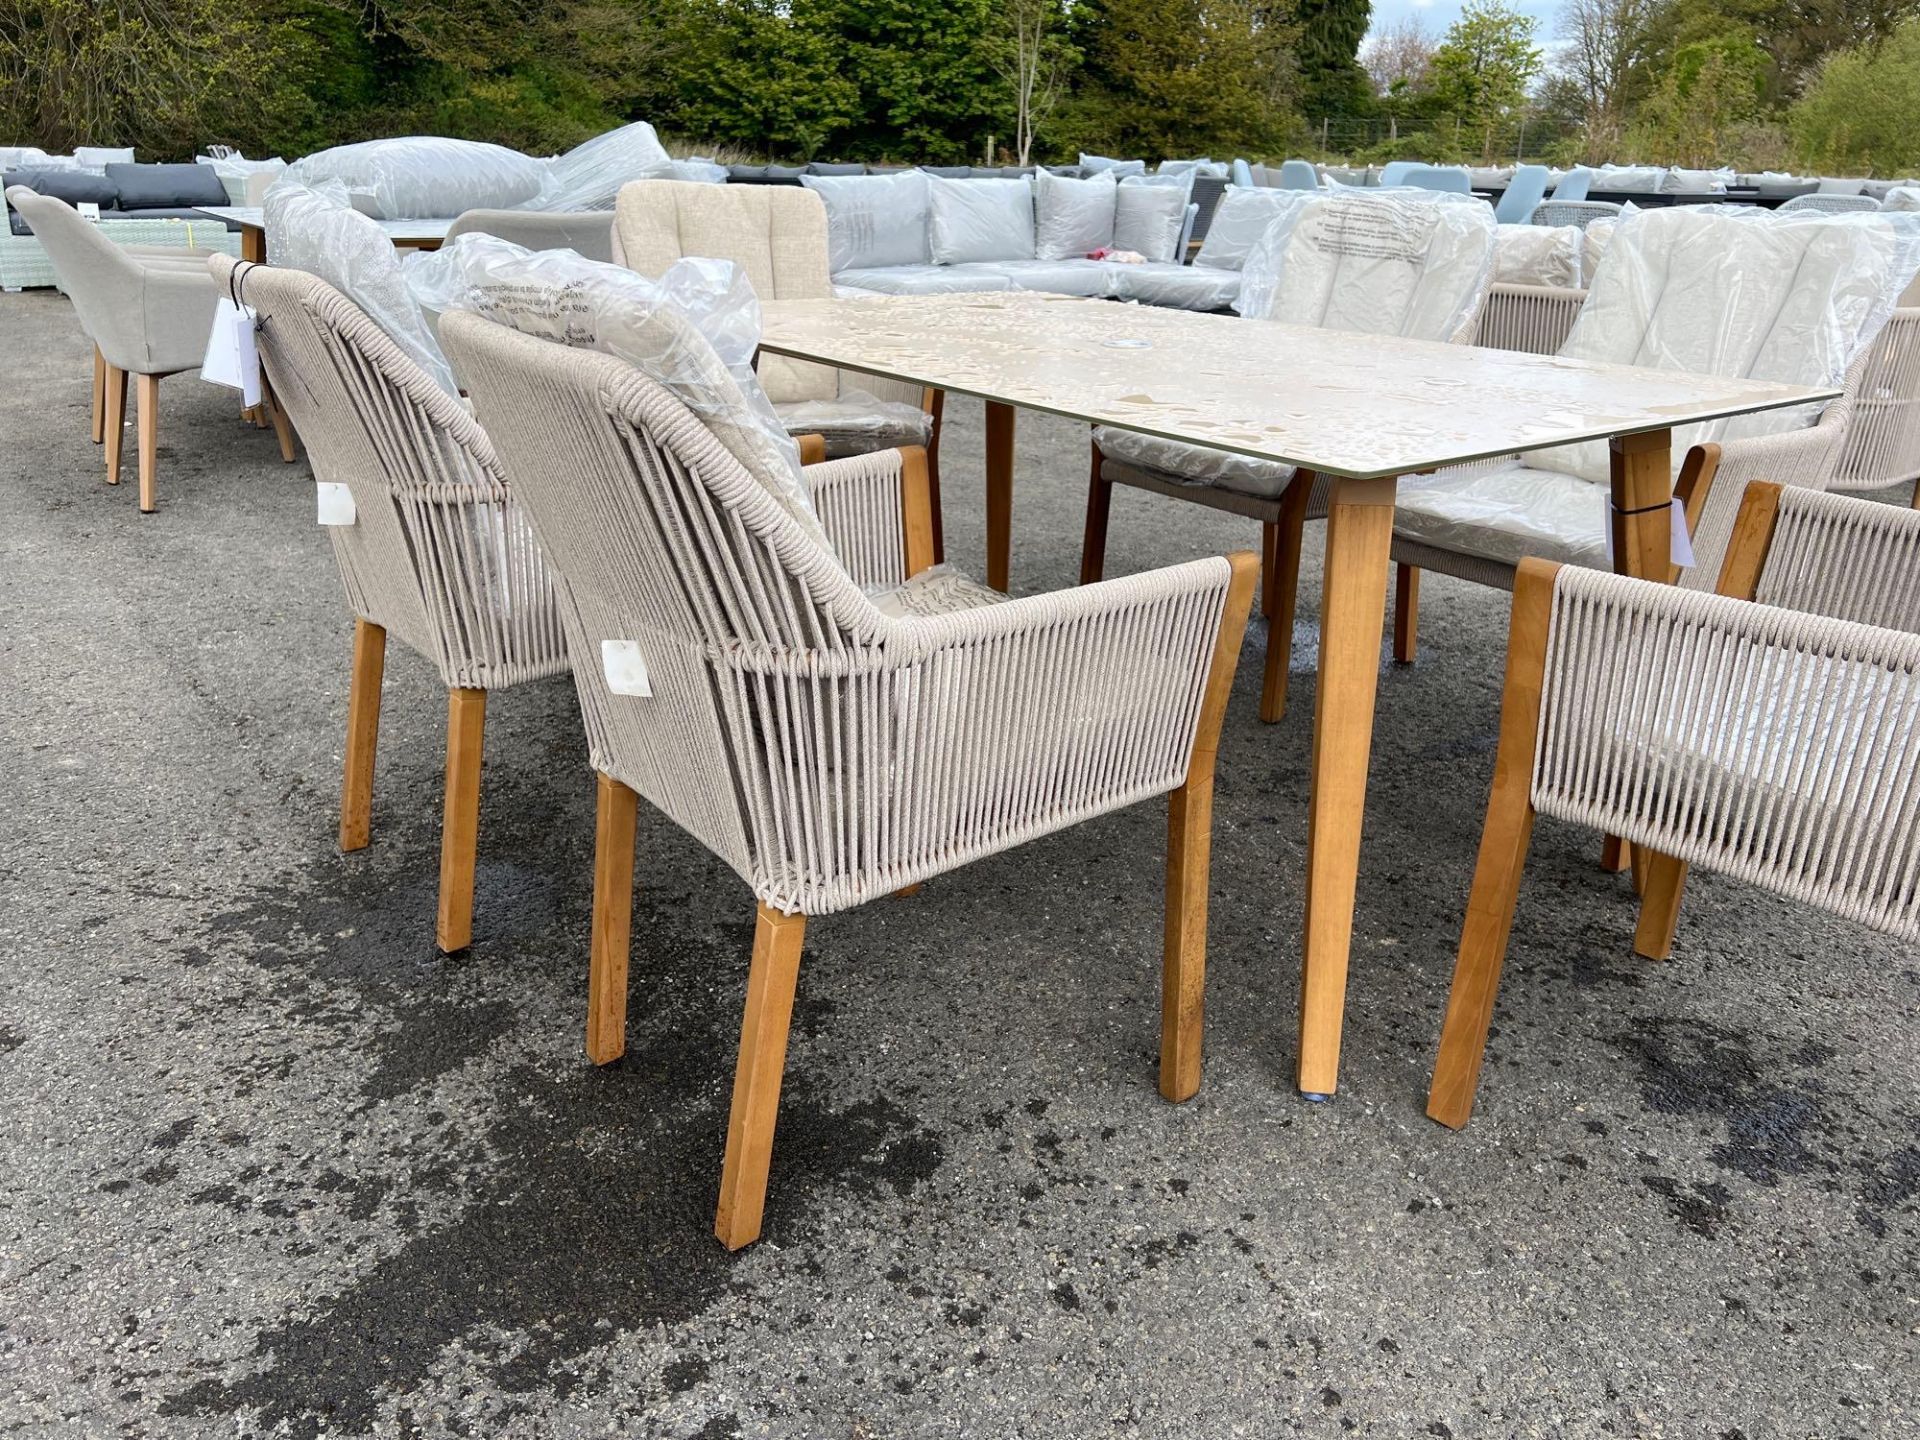 A174 Teak Leg Rectangle Table with 6 x Rope Armchairs Sandstone - Image 2 of 4